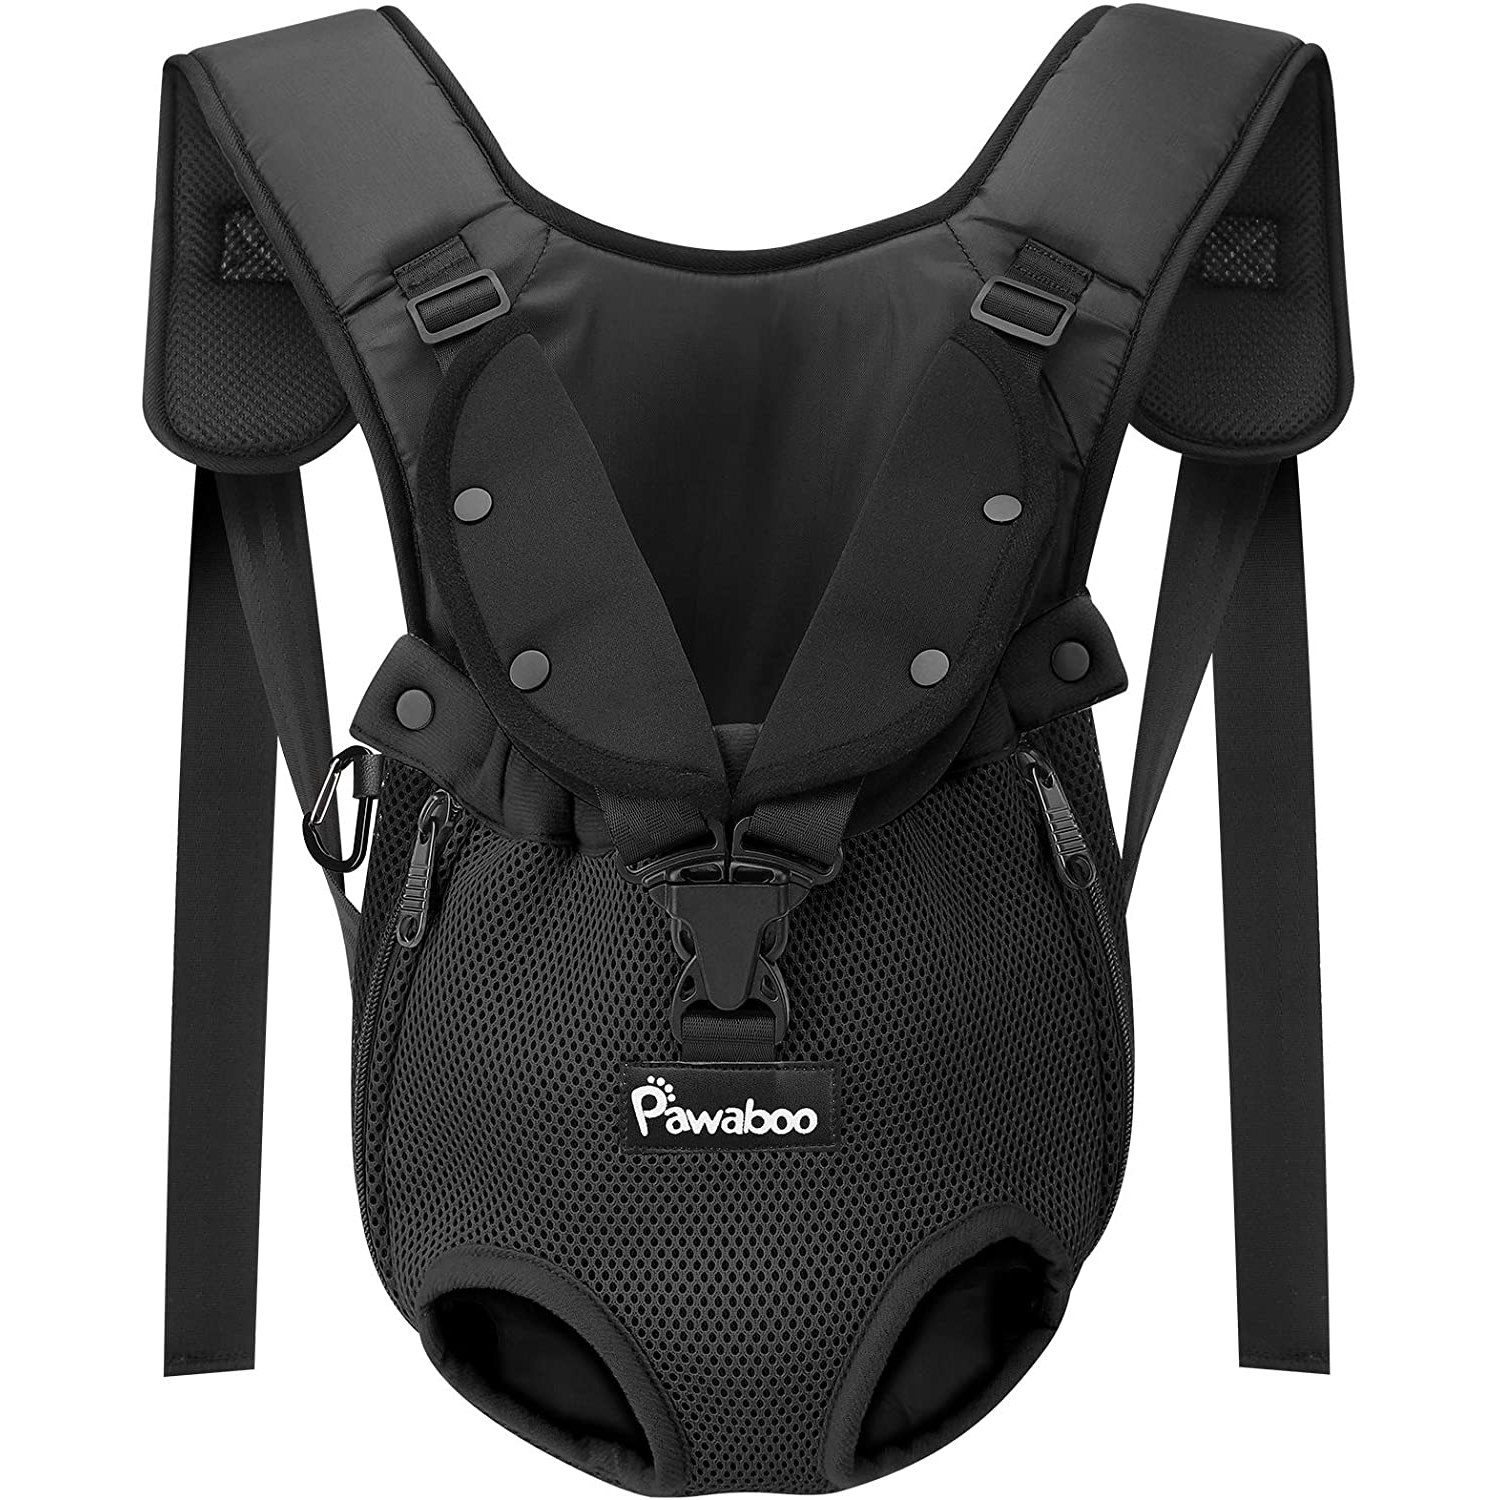 Pawaboo Dog Carrier Backpack Front View